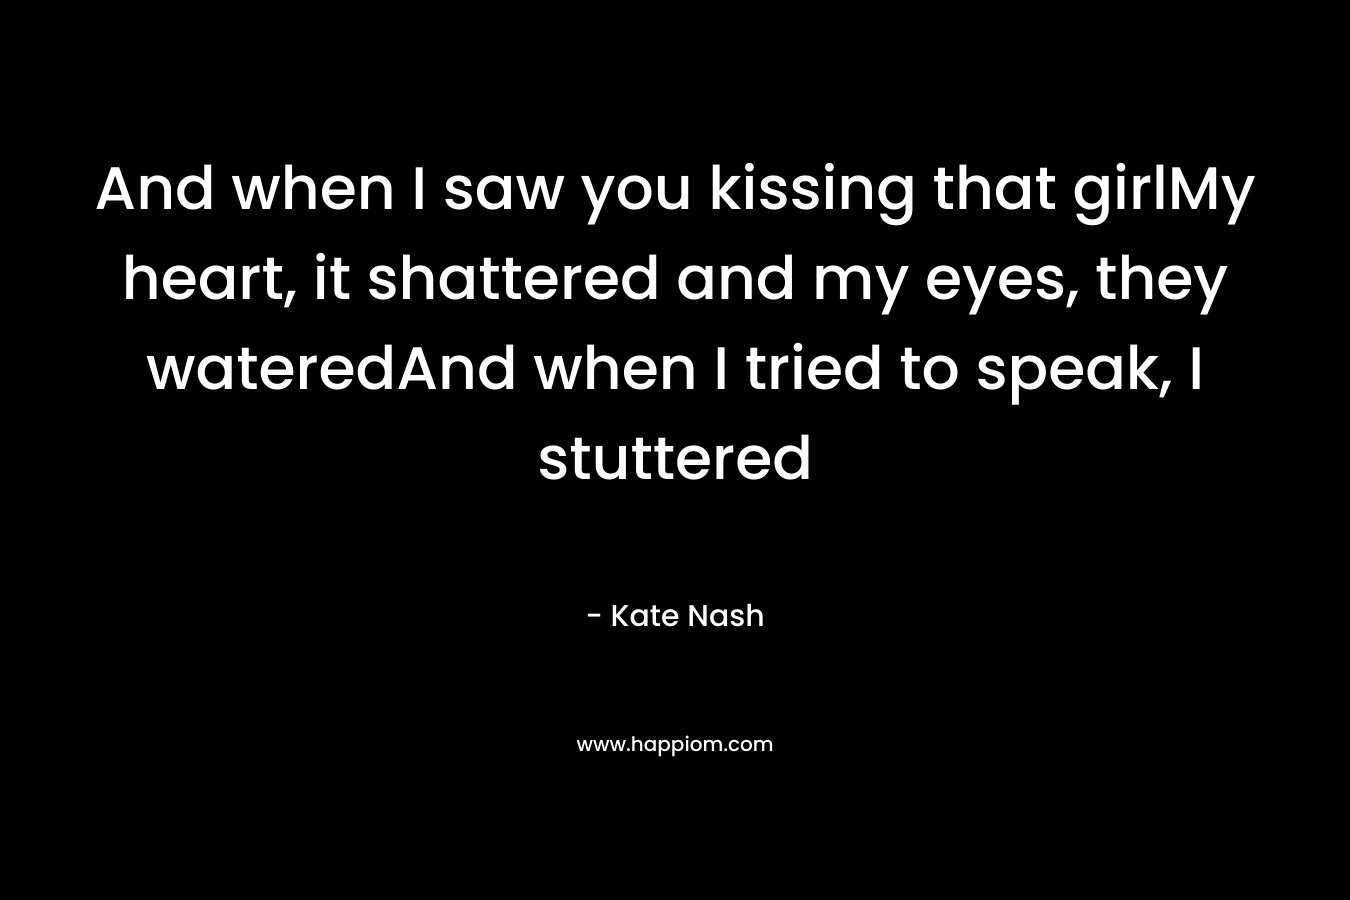 And when I saw you kissing that girlMy heart, it shattered and my eyes, they wateredAnd when I tried to speak, I stuttered